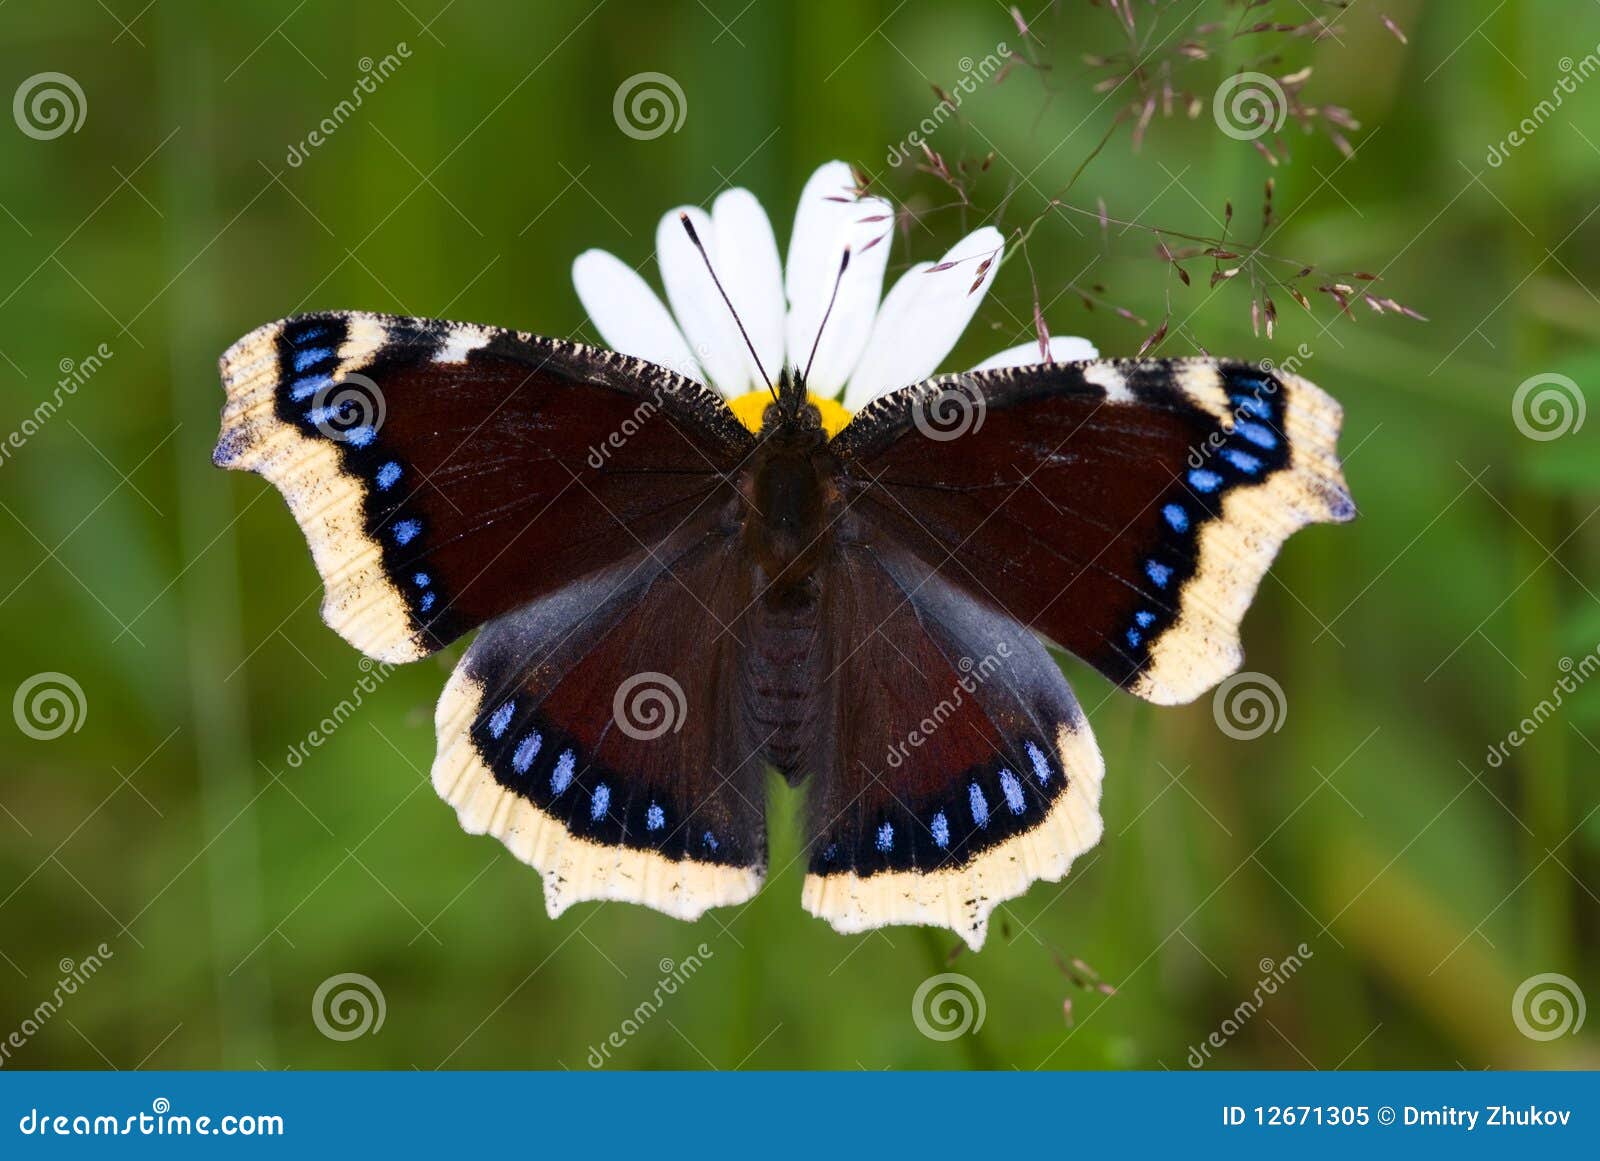 mourning-cloak butterfly